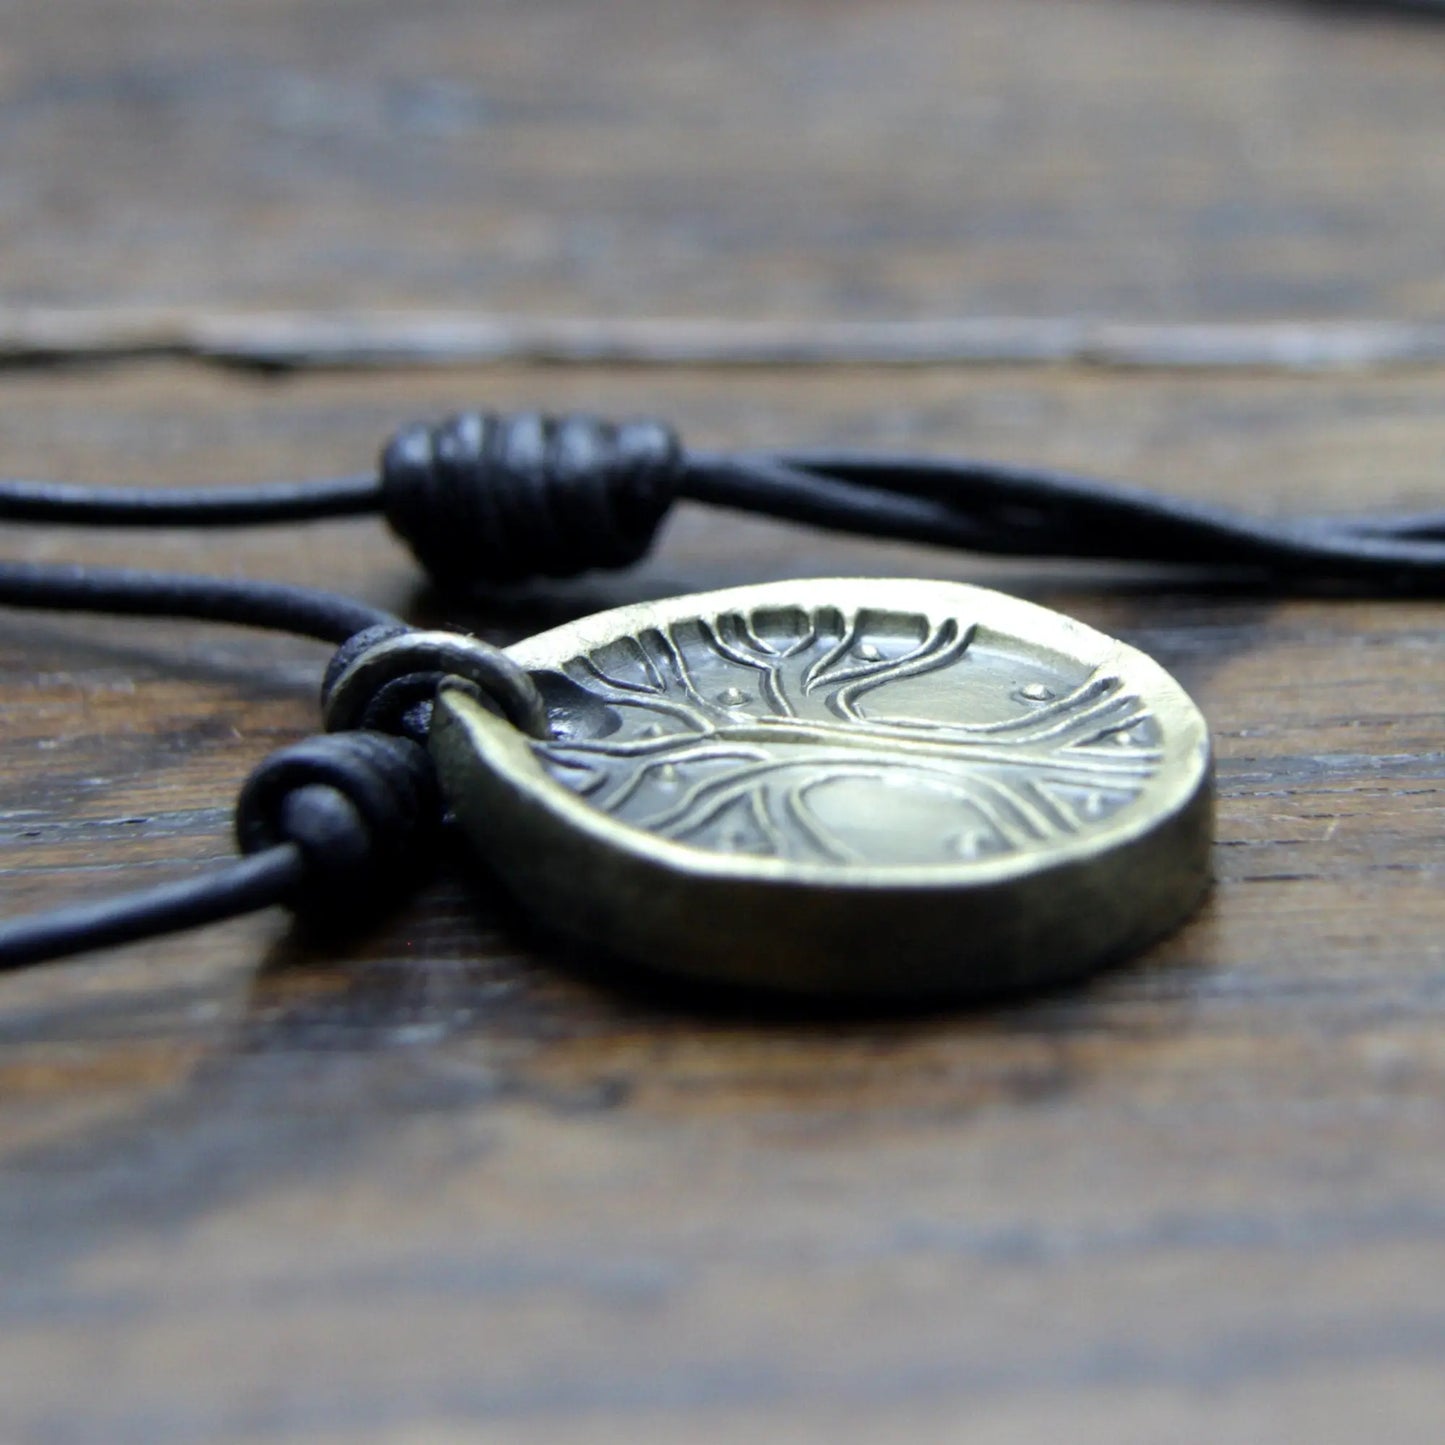 Norse Viking Yggdrasil Tree Iron Coin Pendant on a leather necklace.